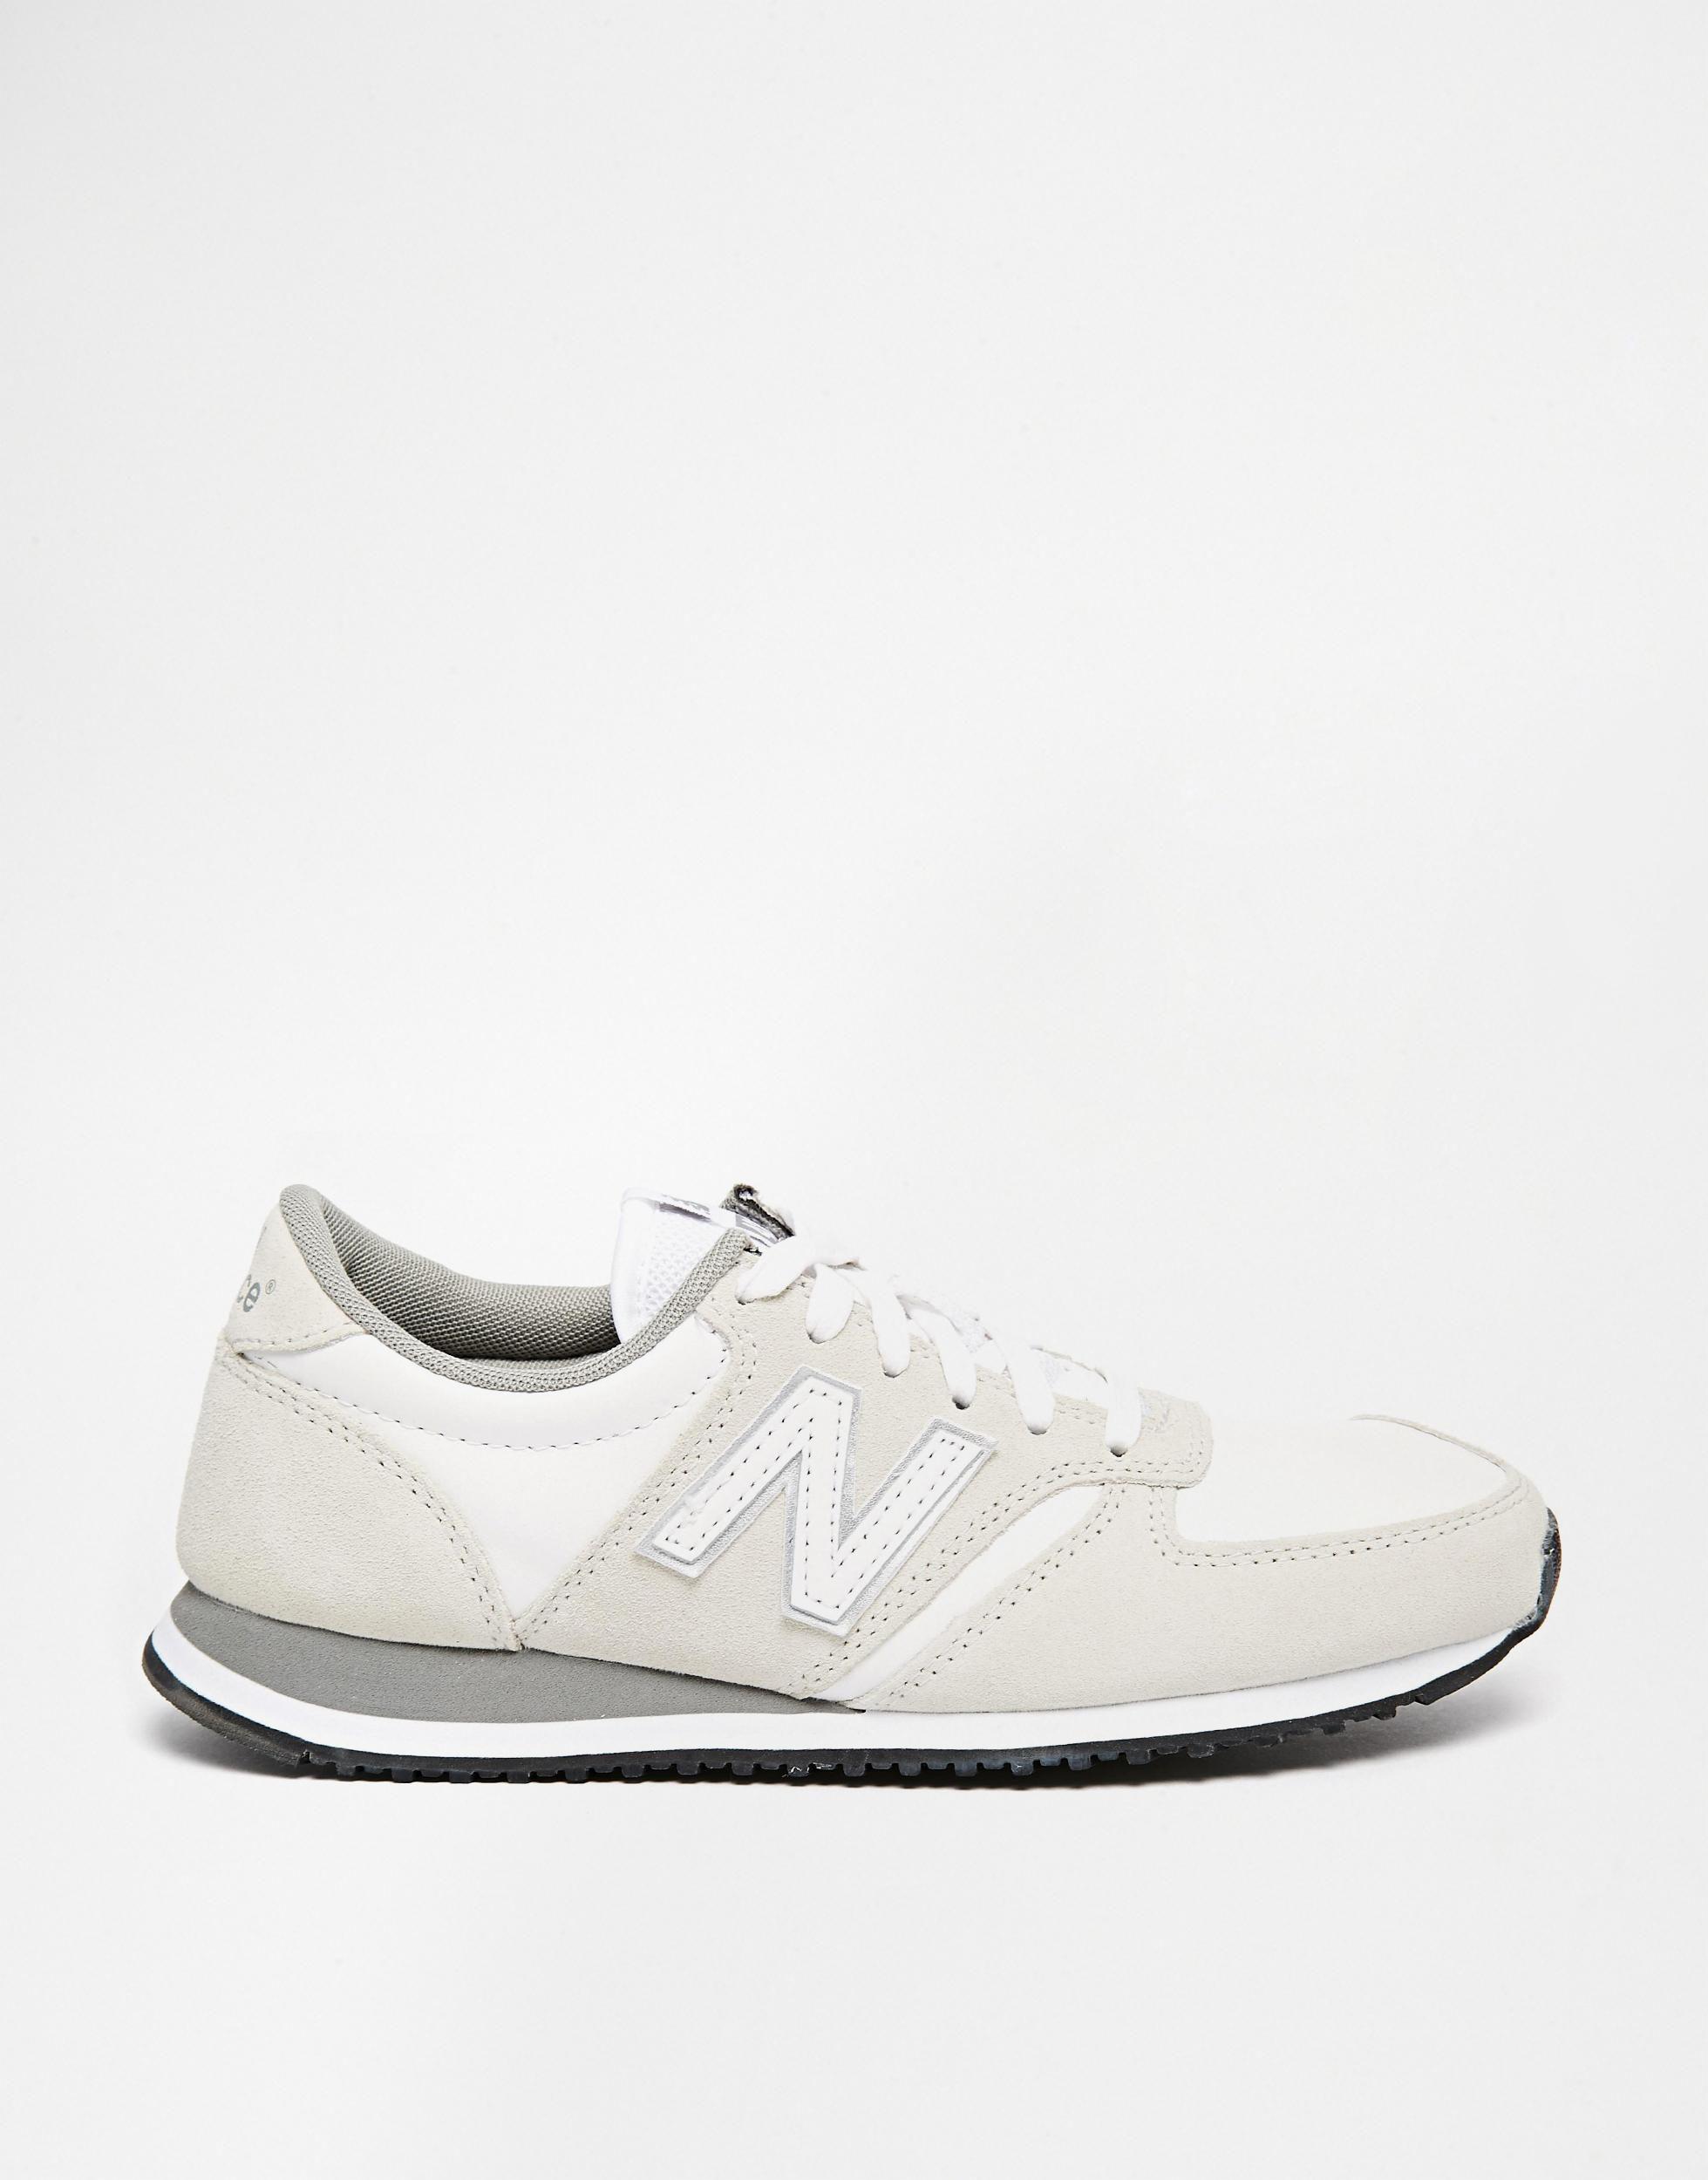 New Balance 420 Cream Suede Trainers in Black | Lyst UK